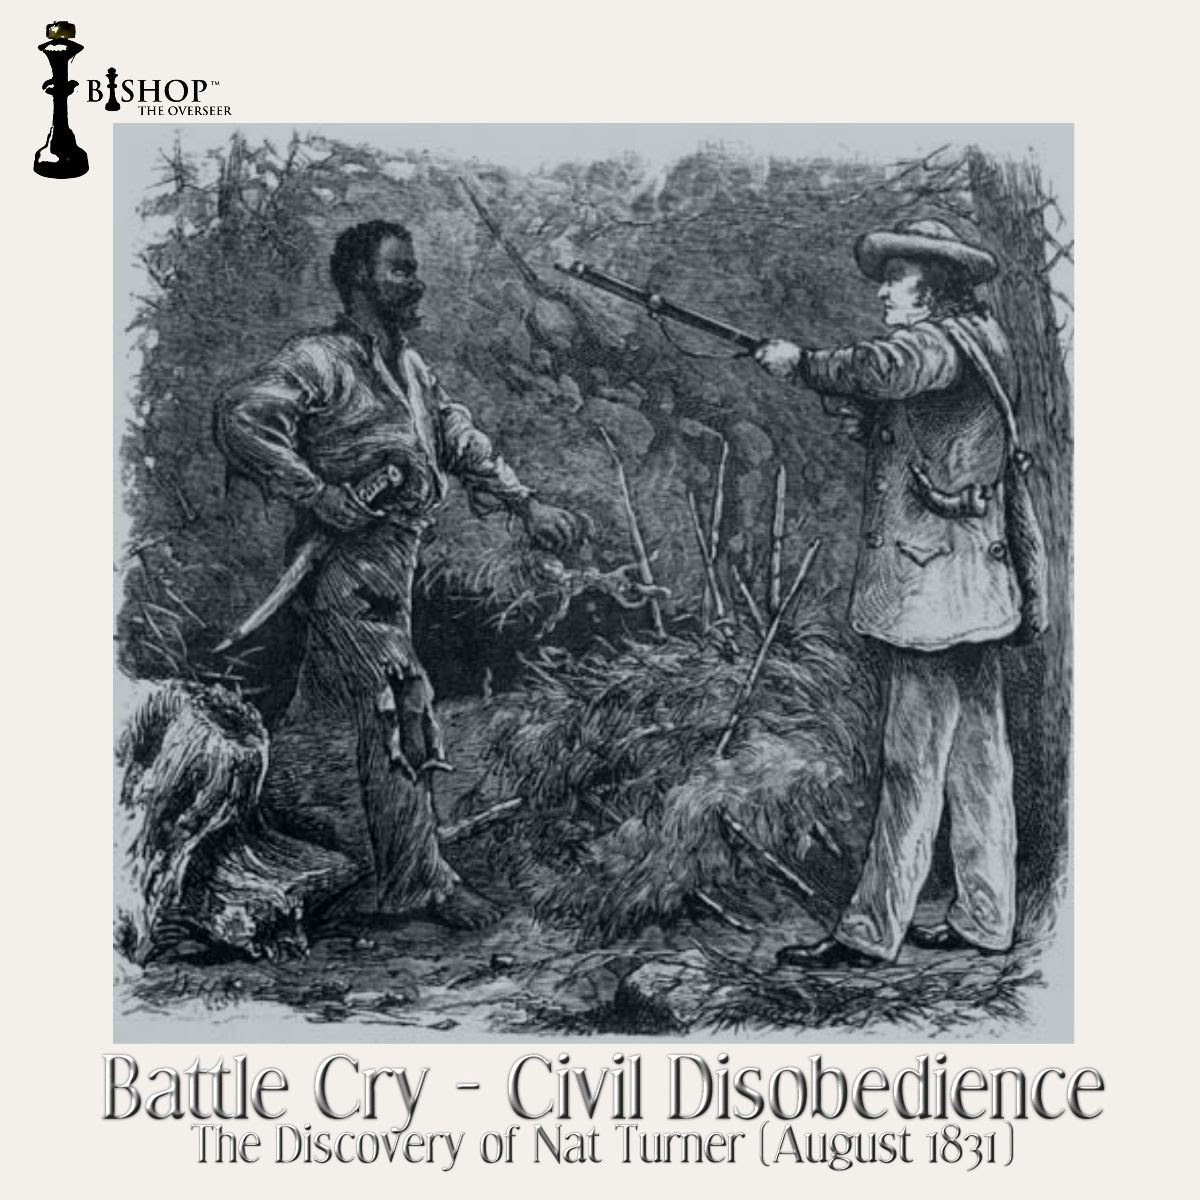 Bishop the Overseer Issues A “Battle Cry” For Change With New Single